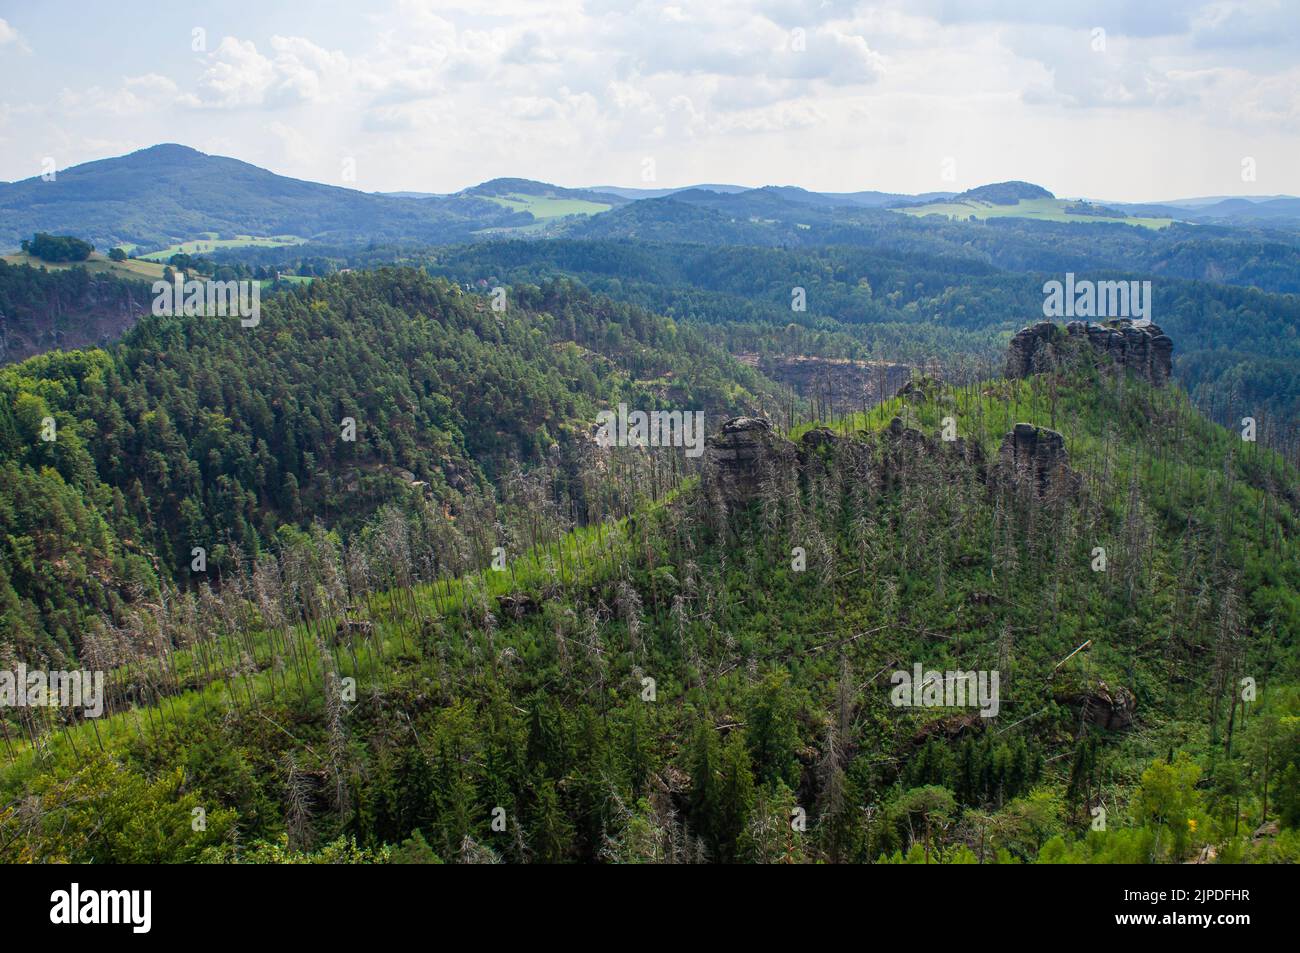 ***2013 FILE PHOTO***  In 2006, on 22 July, a week-long forest fire occurred on Havrani Hill near Jetrichovice in the Bohemian Switzerland National Pa Stock Photo